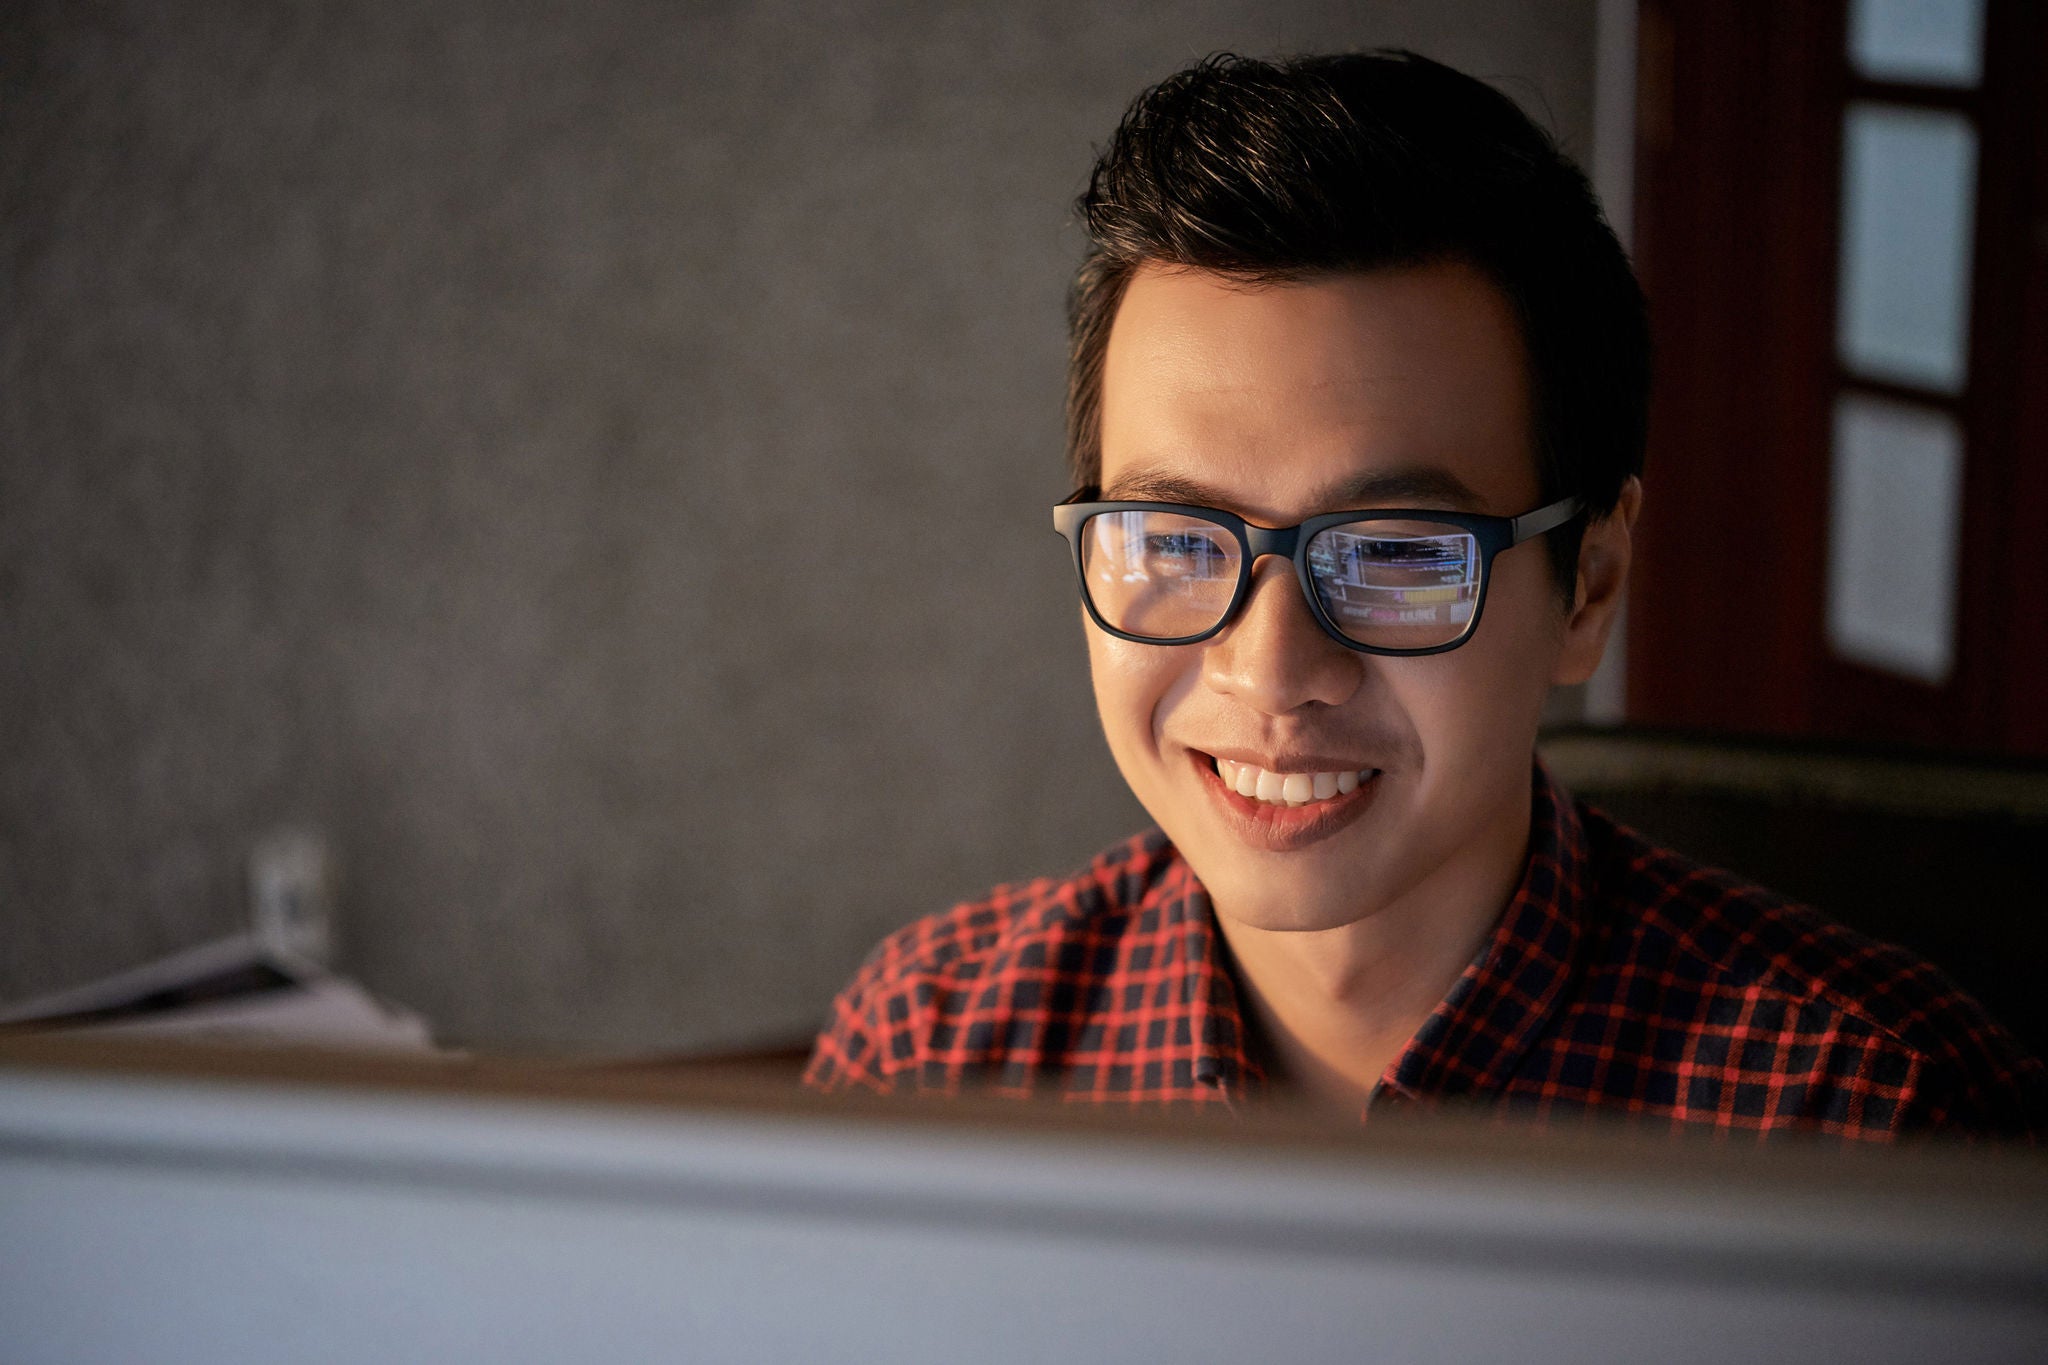 Happy young Asian software developer reading e-mails from grateful clients